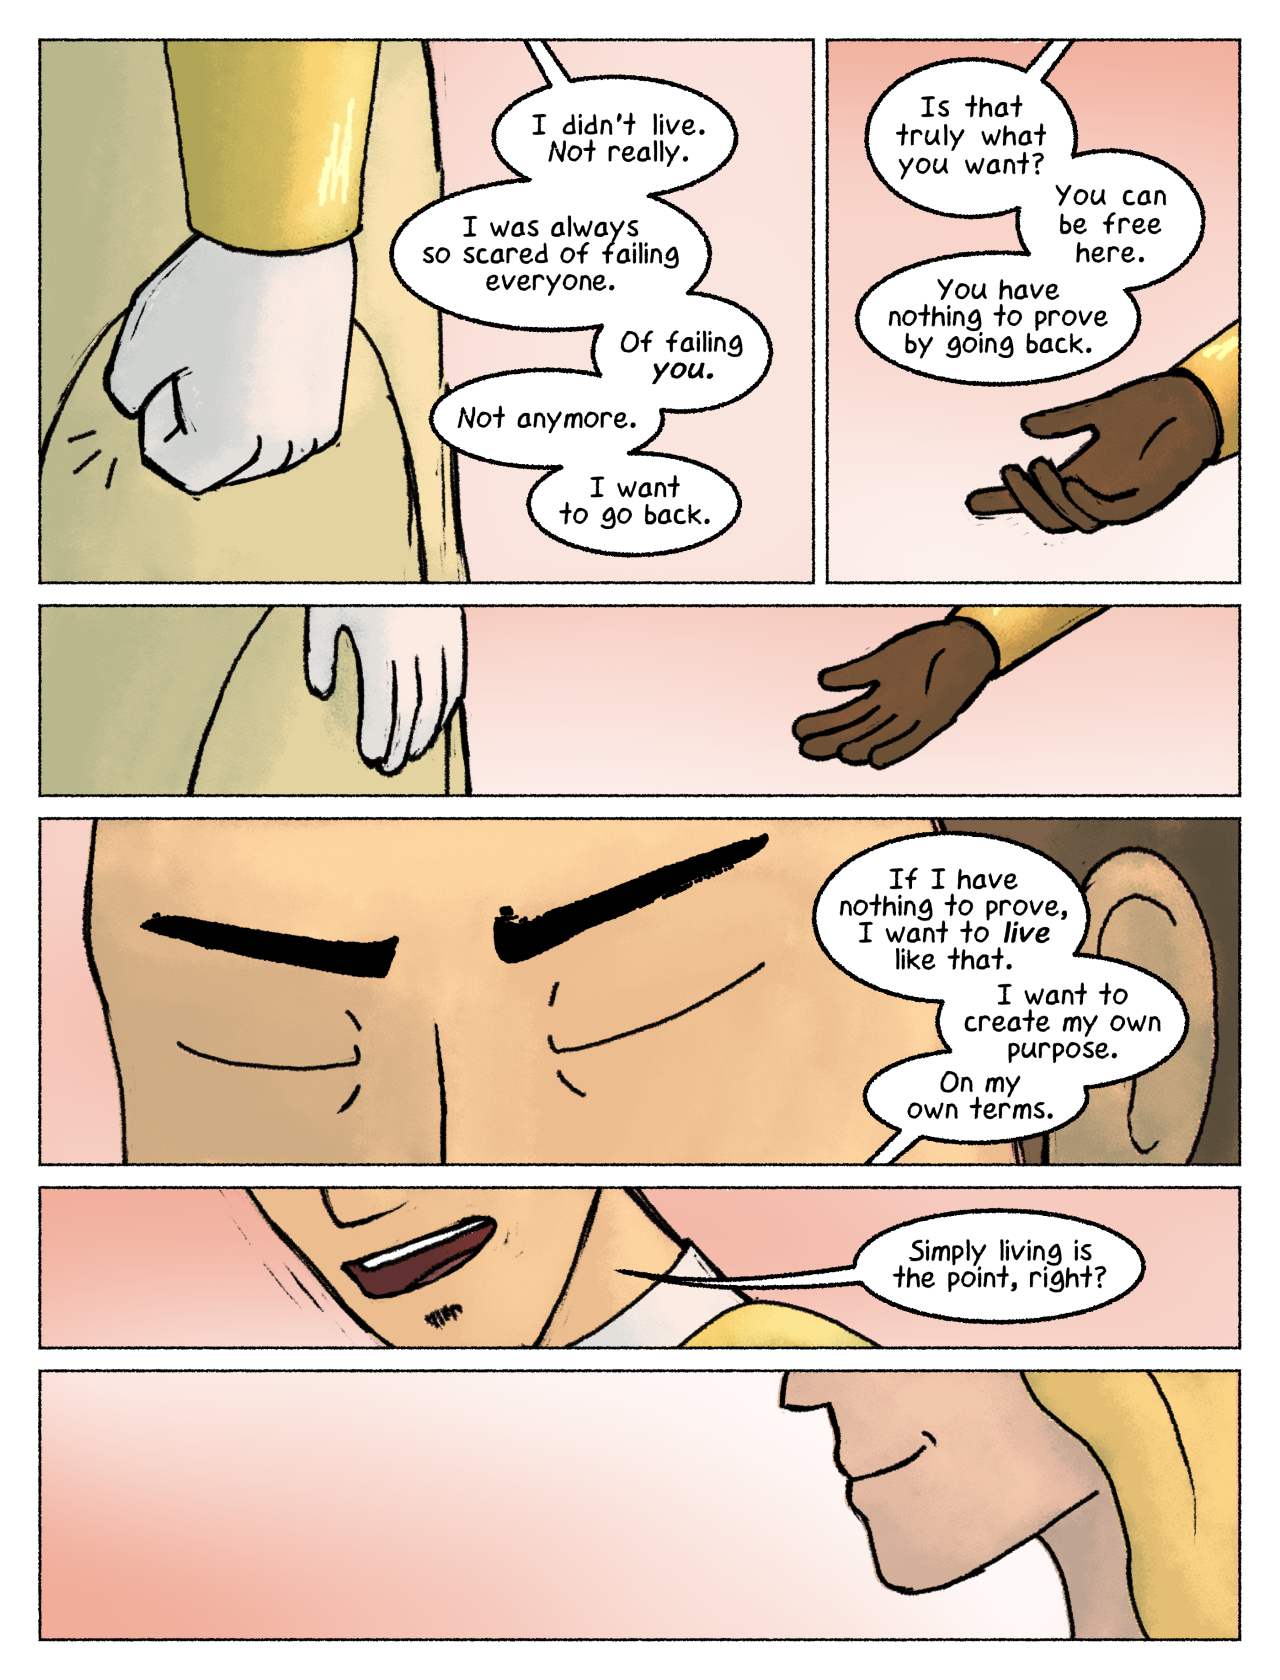 Nothing To Prove – Page 8